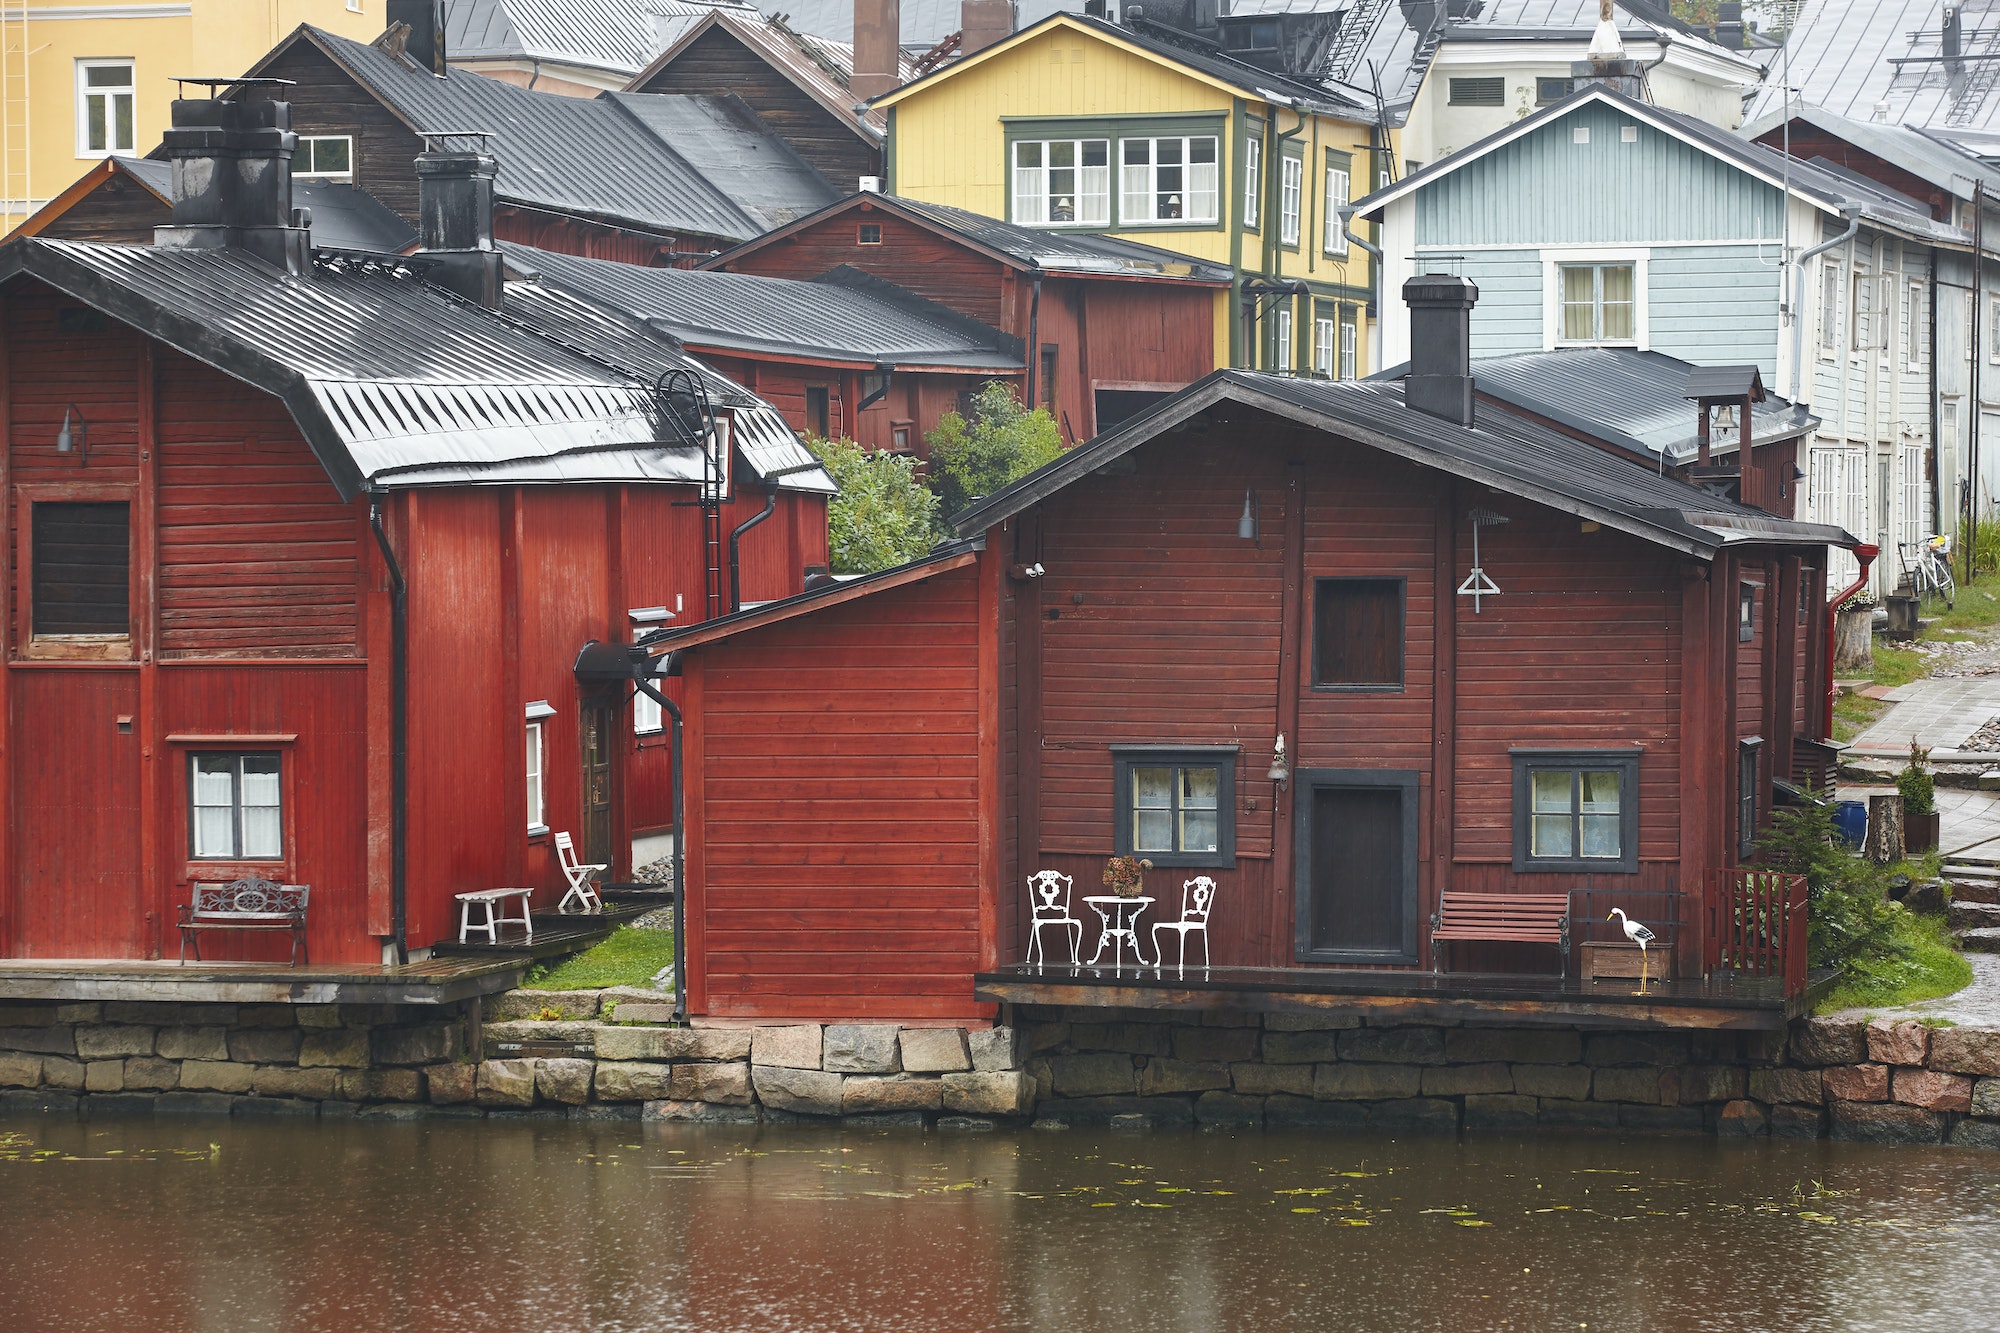 Traditional wooden houses in Porvoo. Finland old town heritage. Tourism